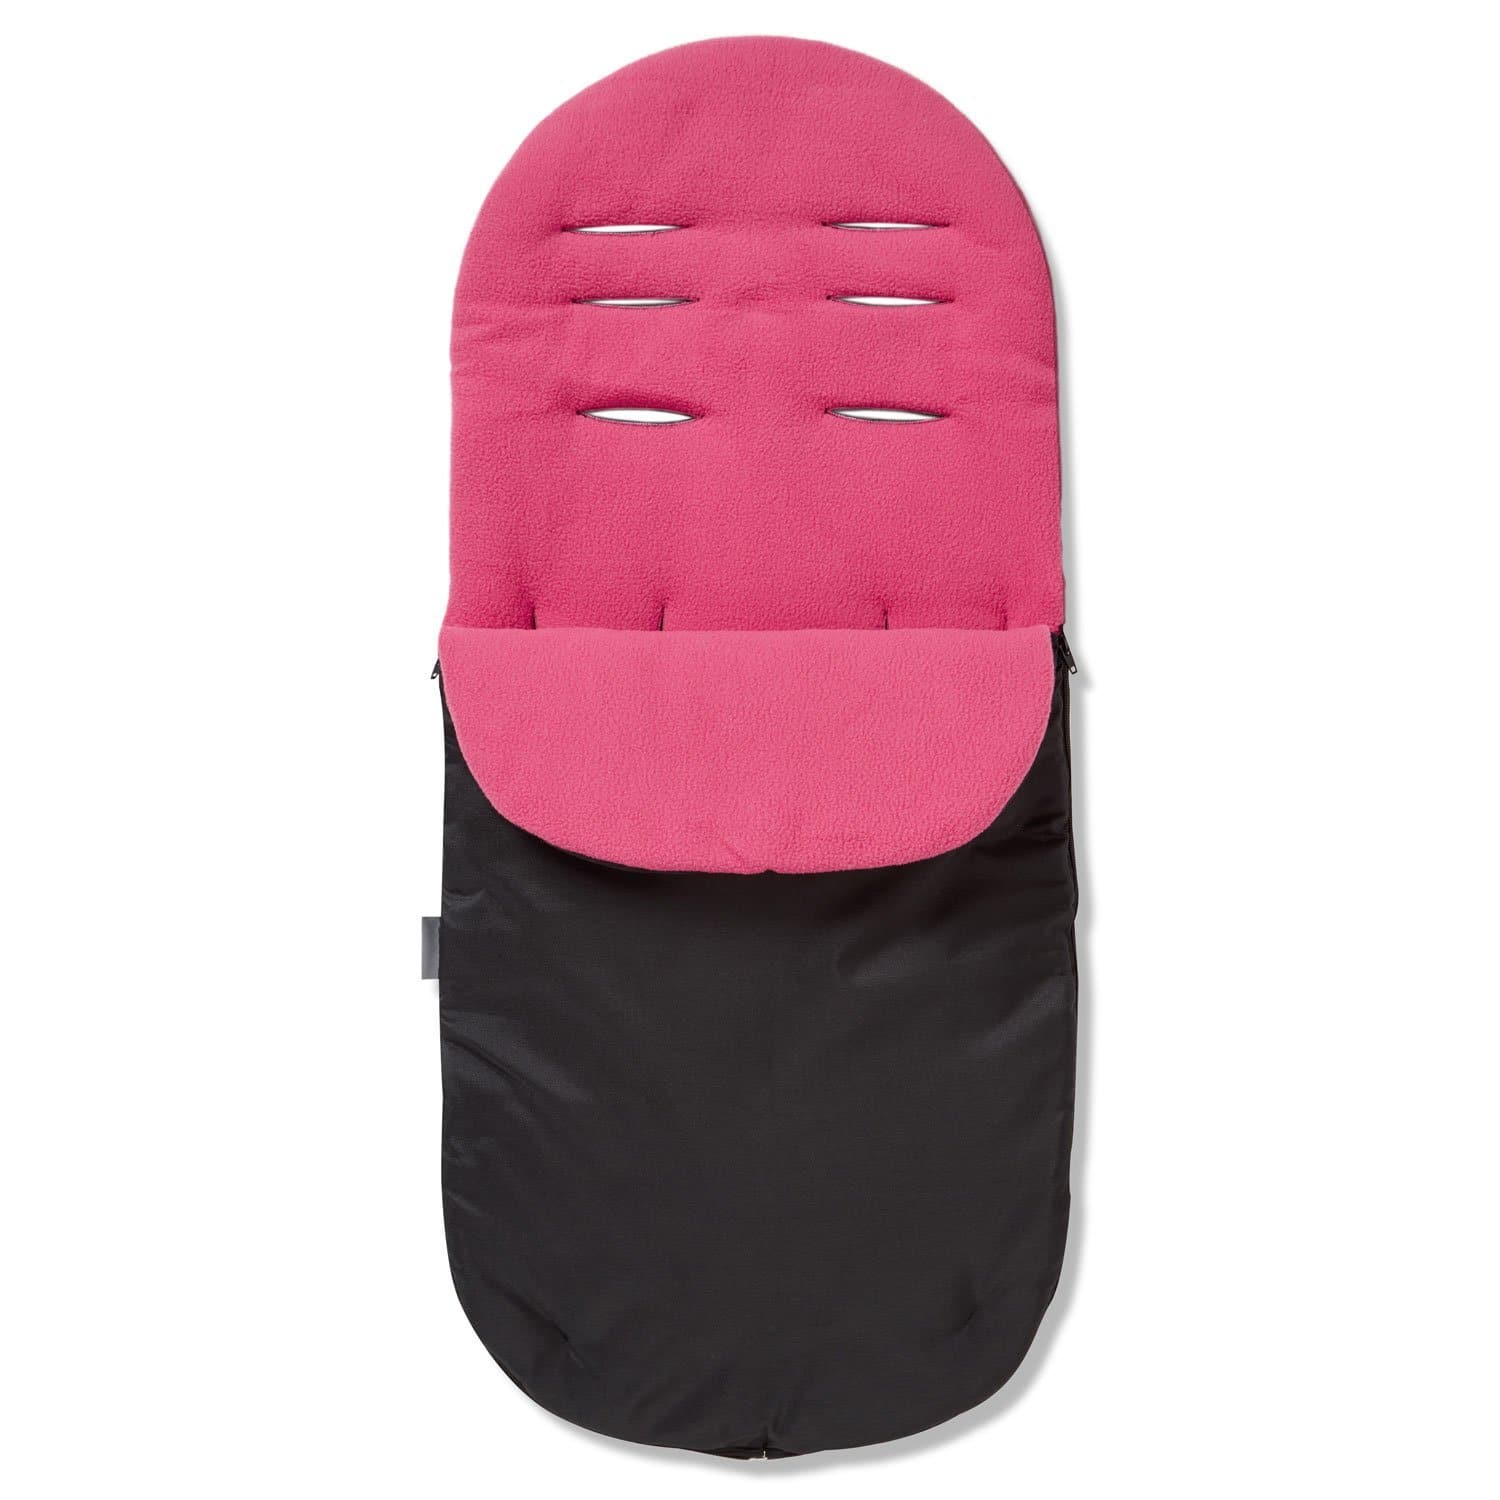 Footmuff / Cosy Toes Compatible with Esprit - Dark Pink / Fits All Models | For Your Little One